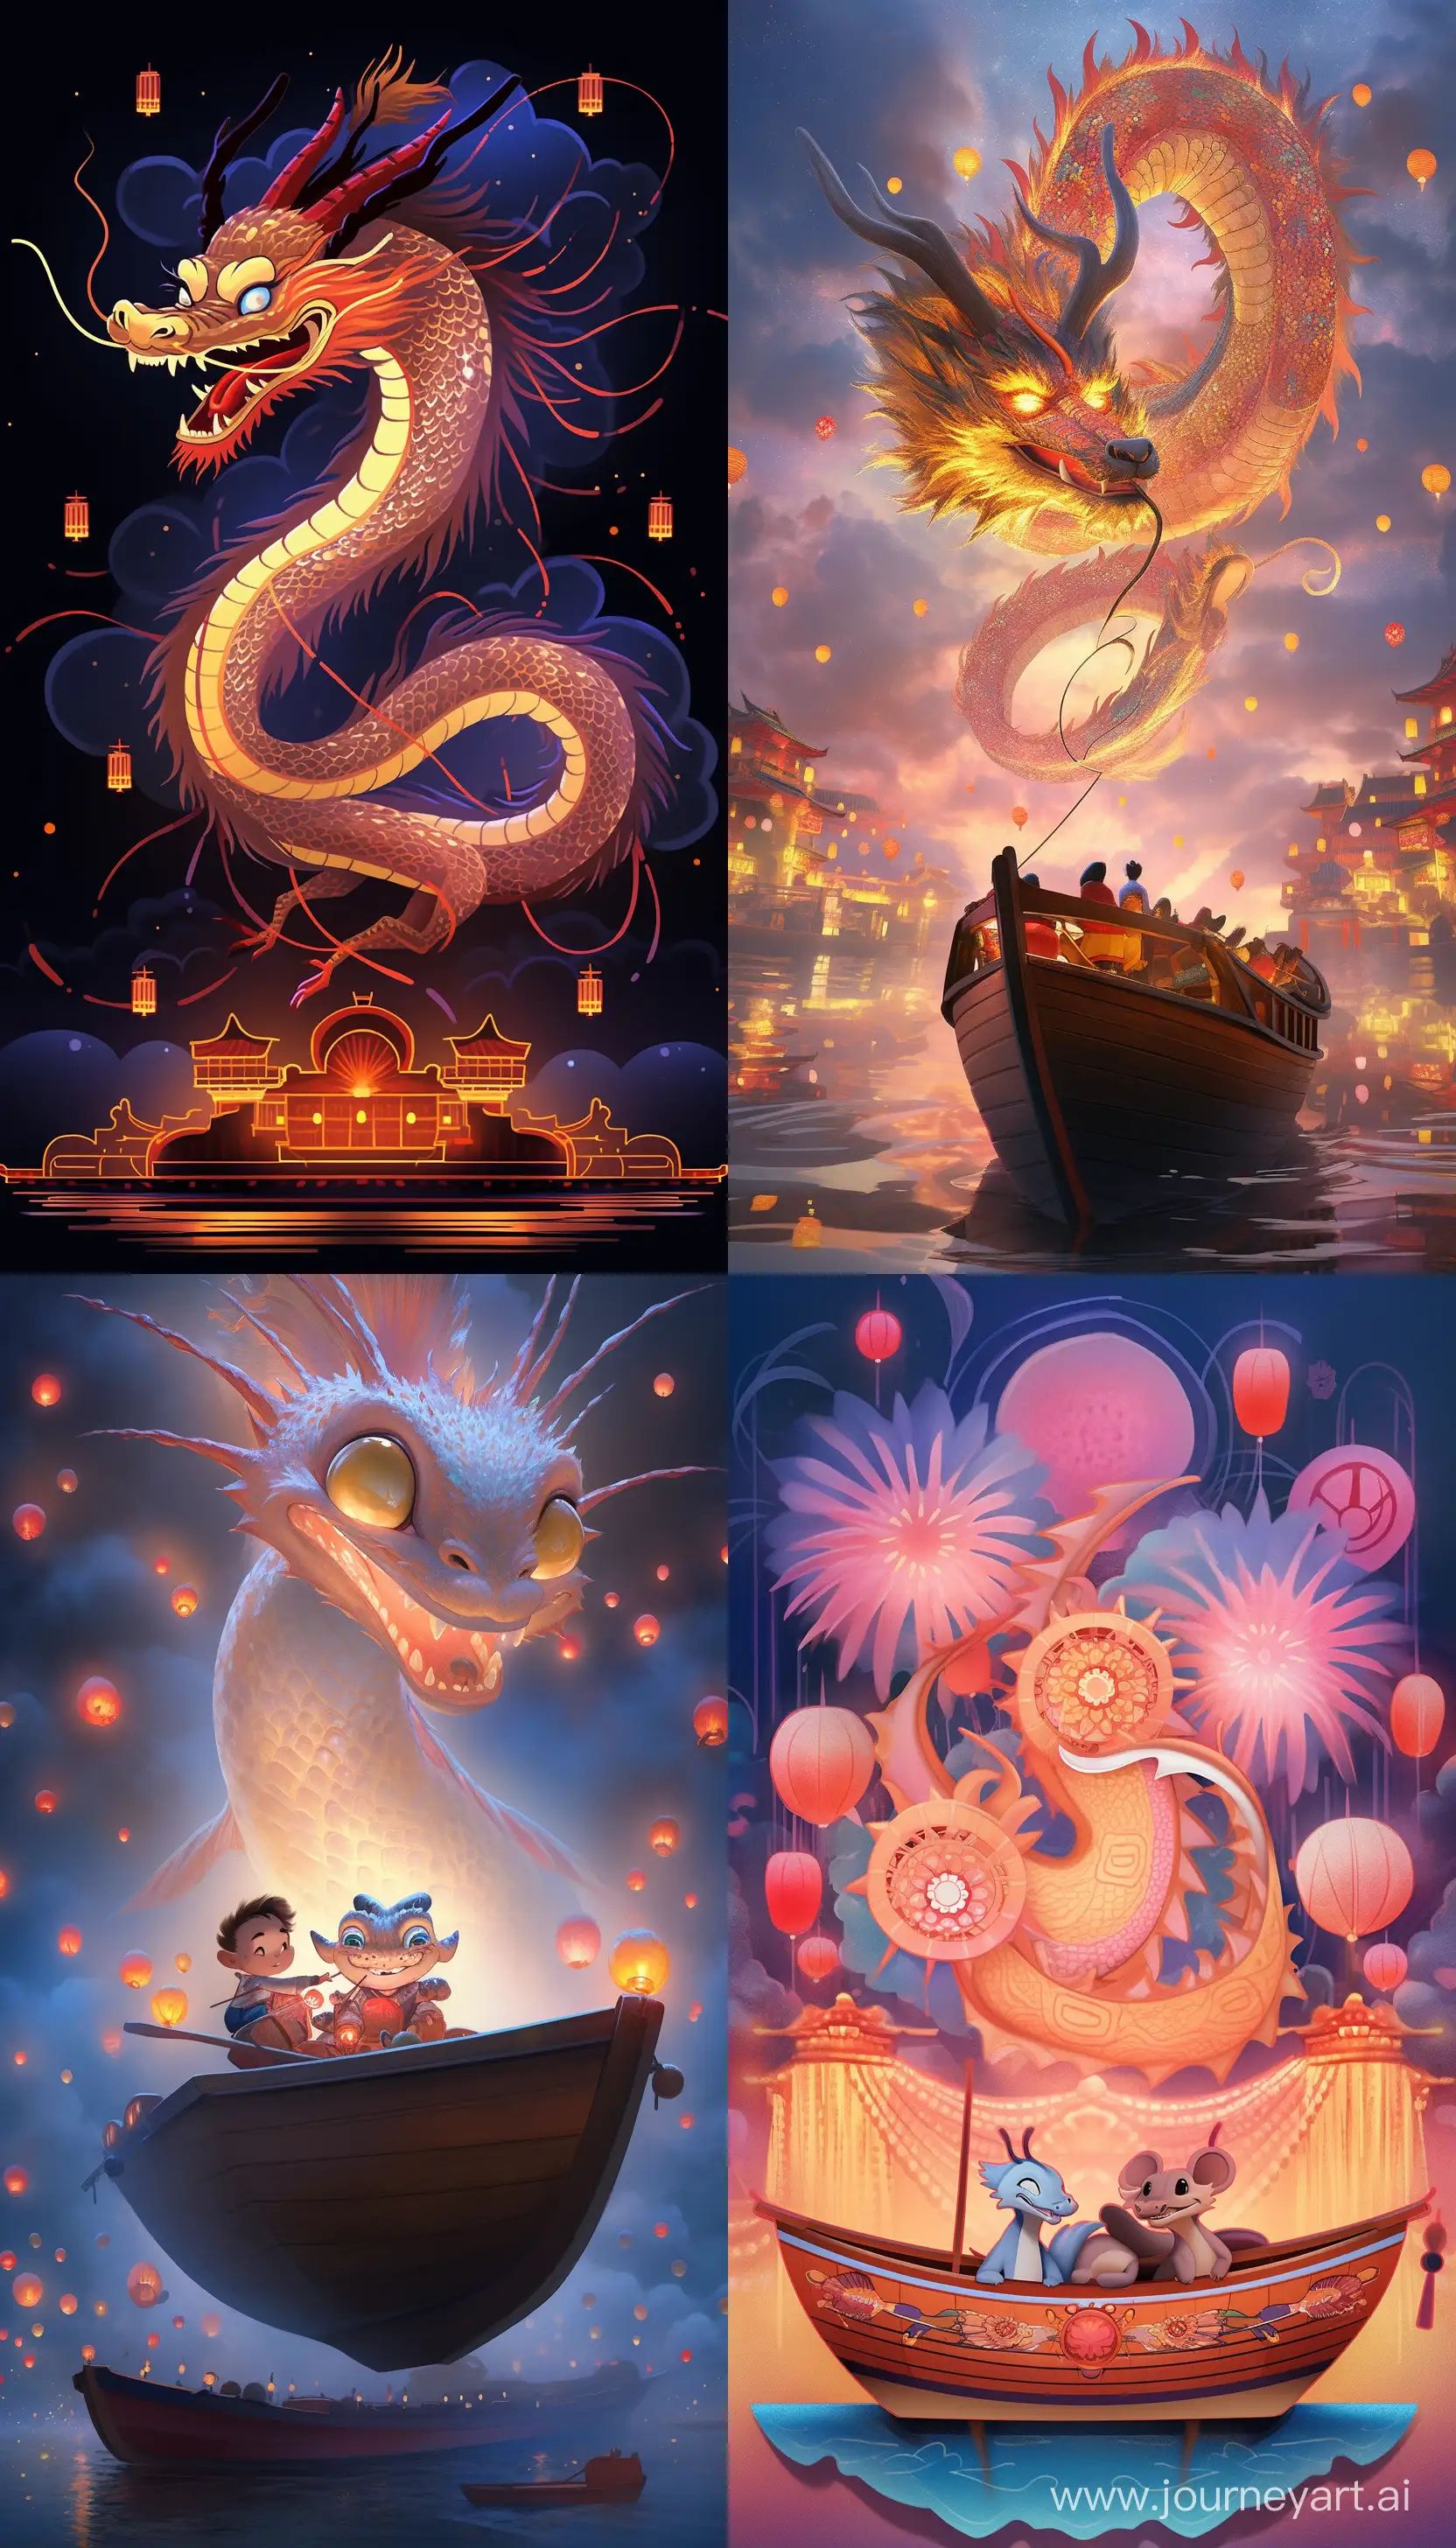 On the midway of our journey, we embark on a voyage with the traditional Chinese dragon. It's as if we've stepped into the enchanting world of a Chinese New Year poster—cute, vibrant, and adorned with elements like fireworks, clouds, and lanterns. Fireworks light up the sky, clouds gently drift by, and lanterns glow, creating a scene filled with joy and tradition. Let's immerse ourselves in the unique charm of Chinese culture and welcome a new beginning together. Wishing you a delightful midway and a journey filled with good fortune --ar 4:7 --niji 5